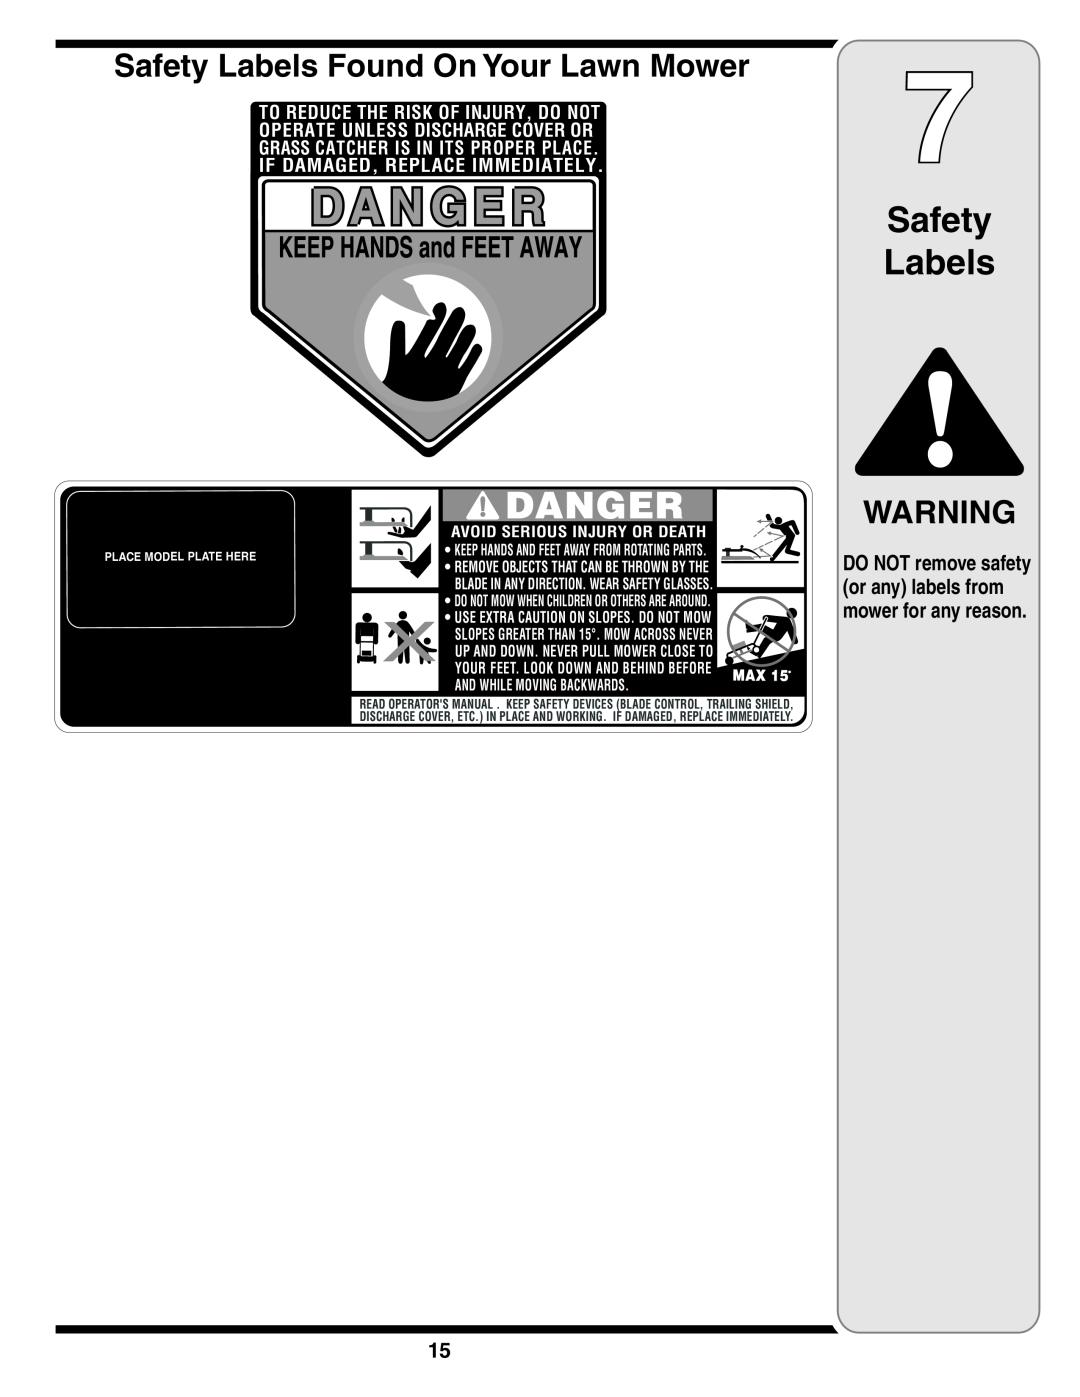 Yard-Man 829 Safety Labels Found On Your Lawn Mower, DO NOT remove safety or any labels from mower for any reason 